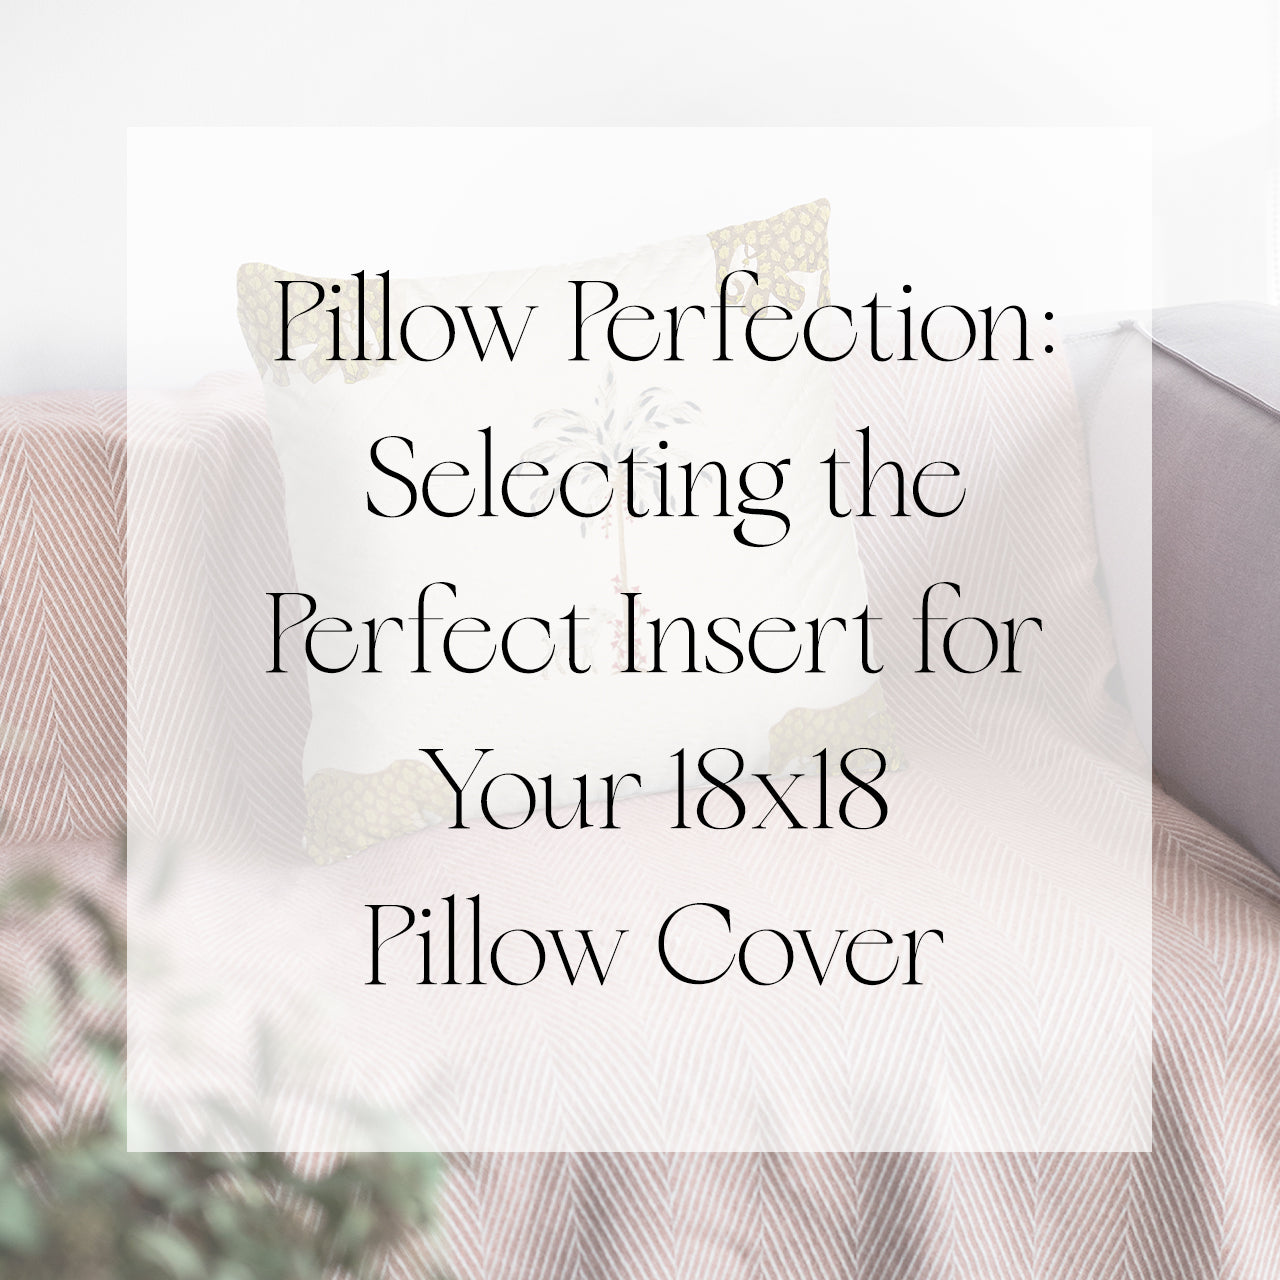 Pillow Perfection: Selecting the Perfect Insert for Your 18x18 Pillow Cover